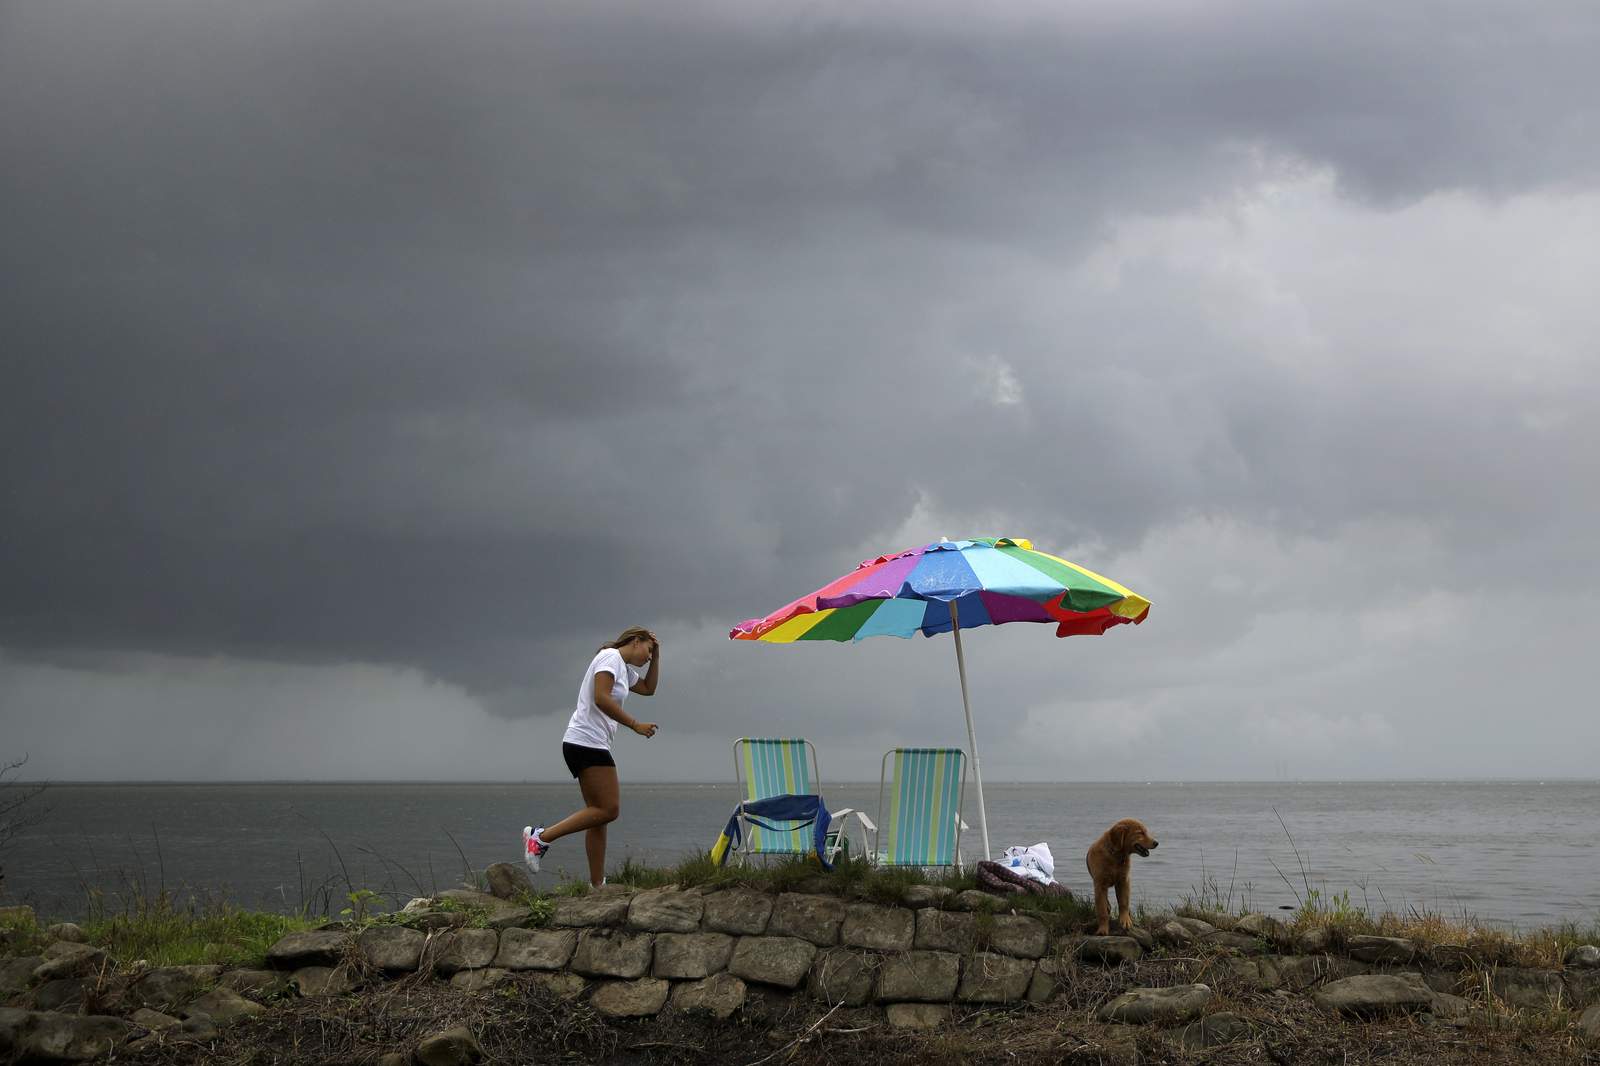 For launch spectators, storms more worrisome than virus